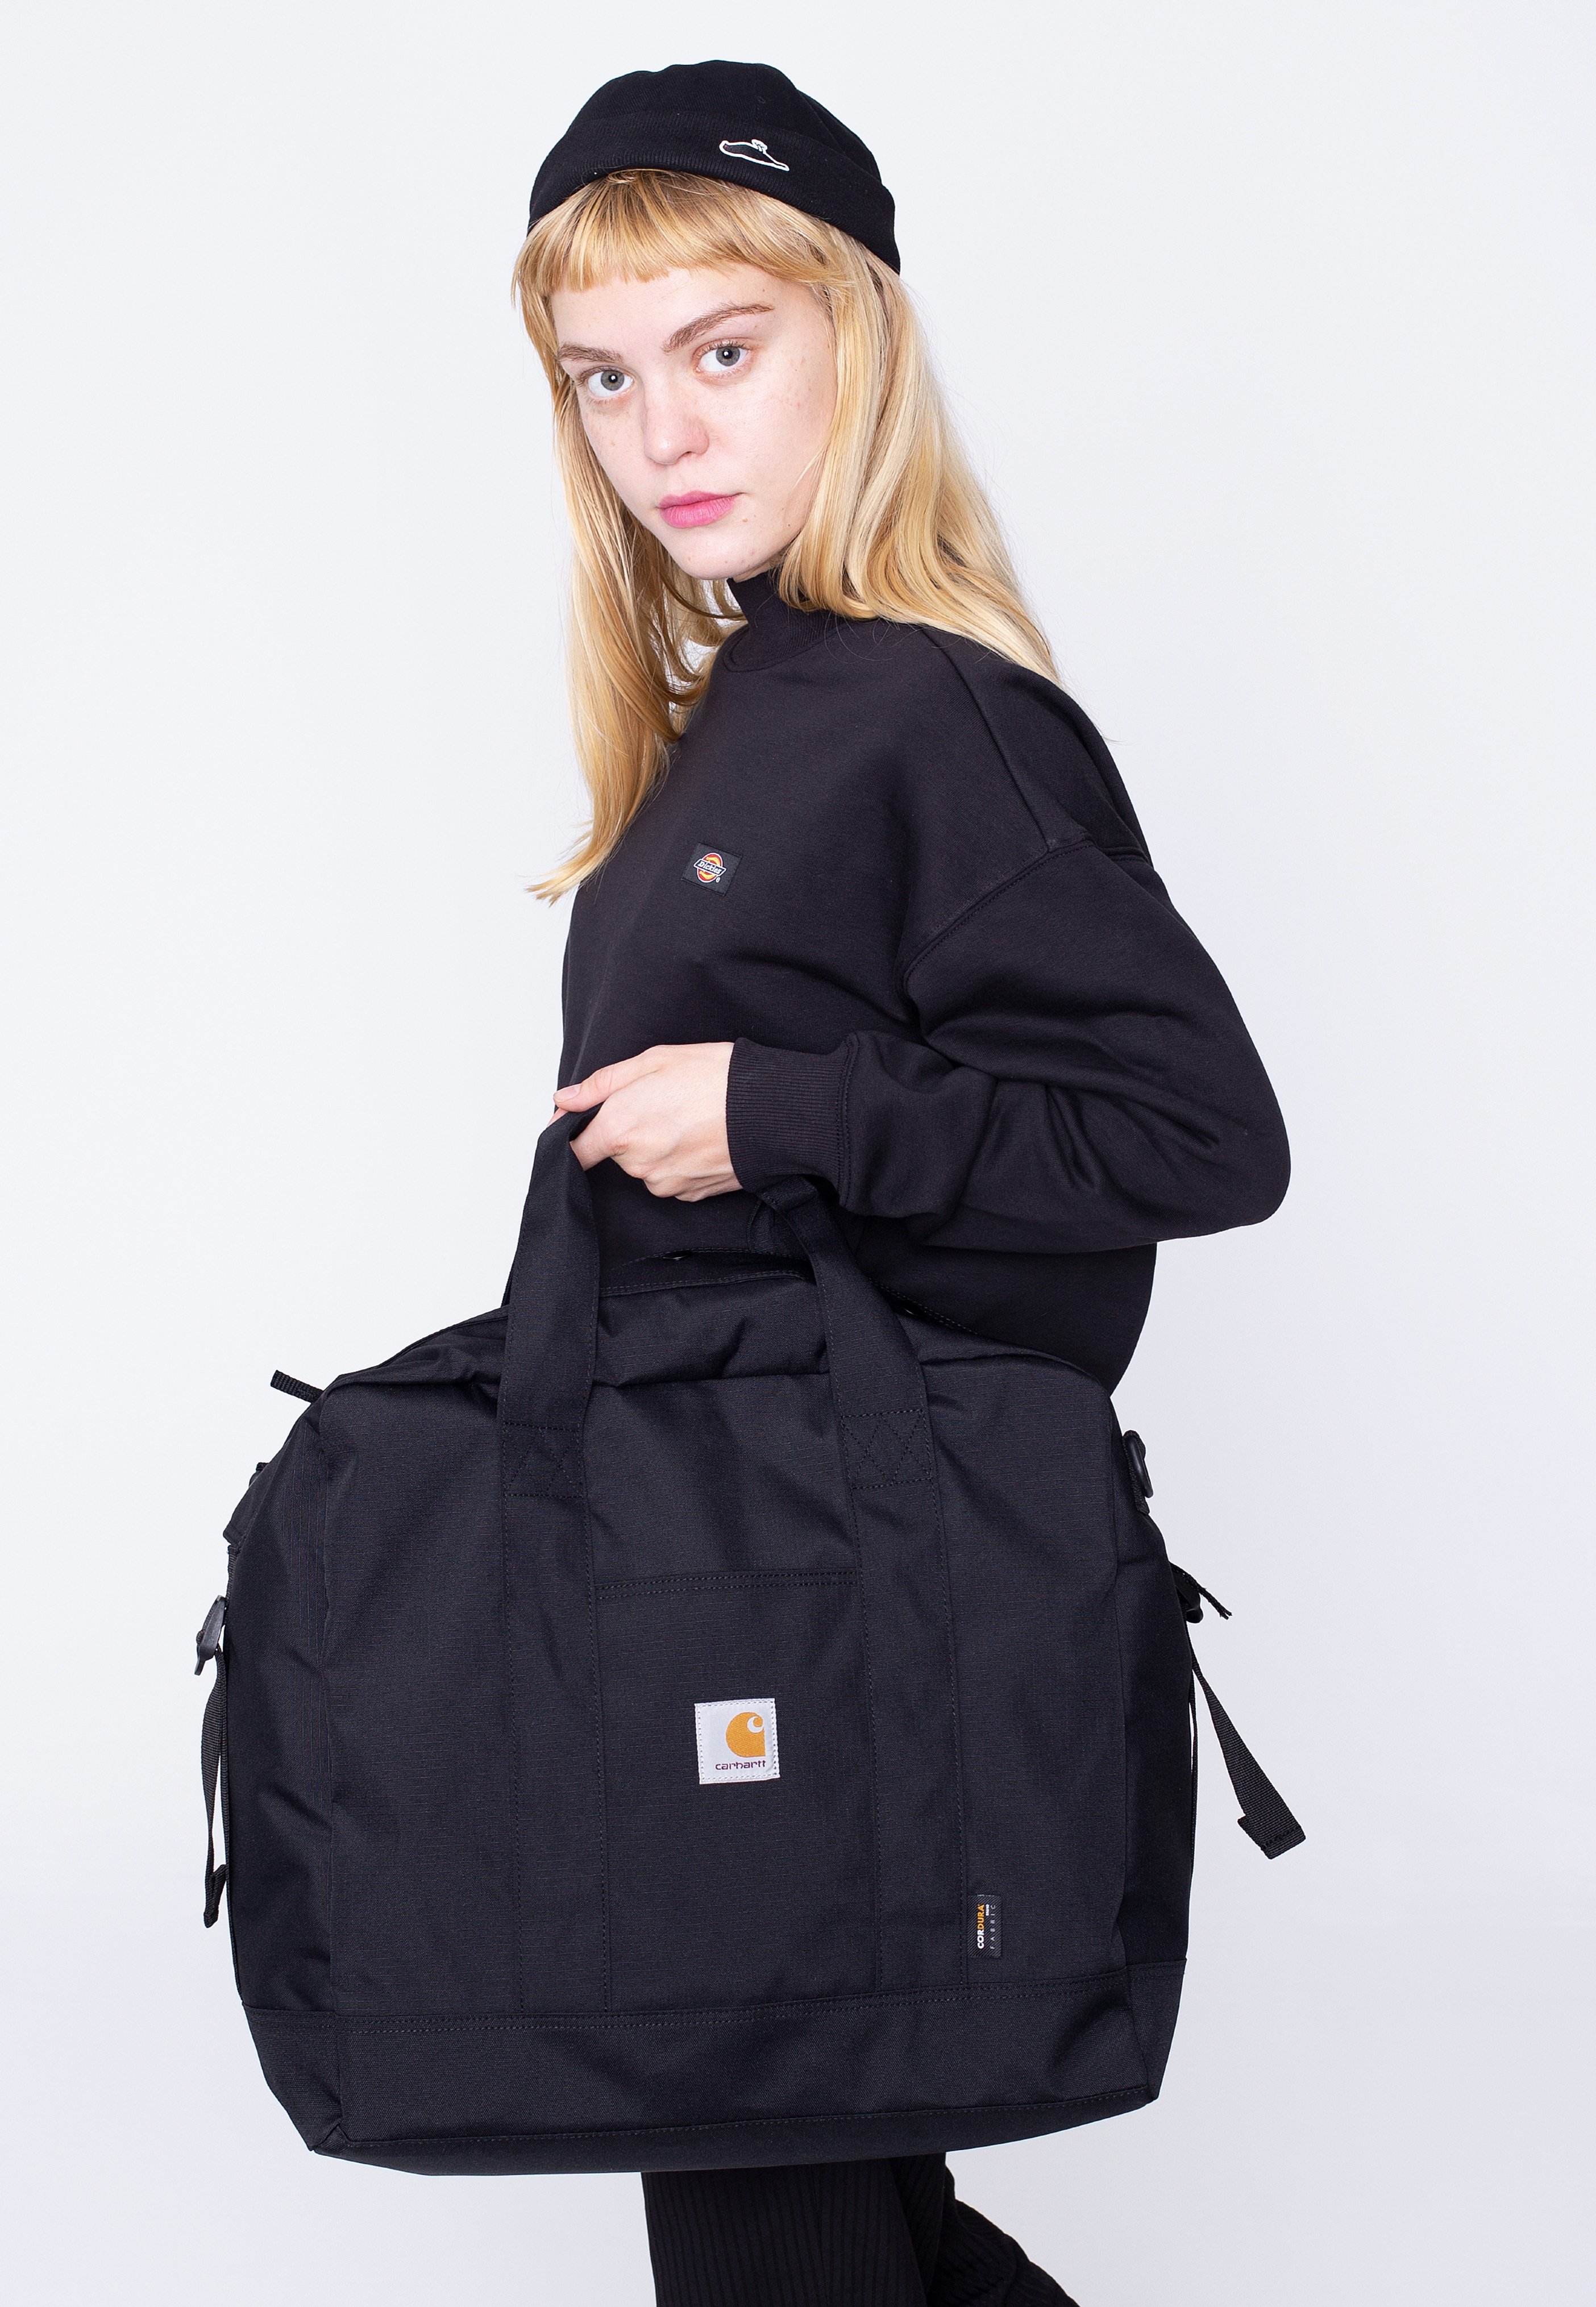 Carhartt WIP - Vernon Weekend Soot - Bag | IMPERICON US